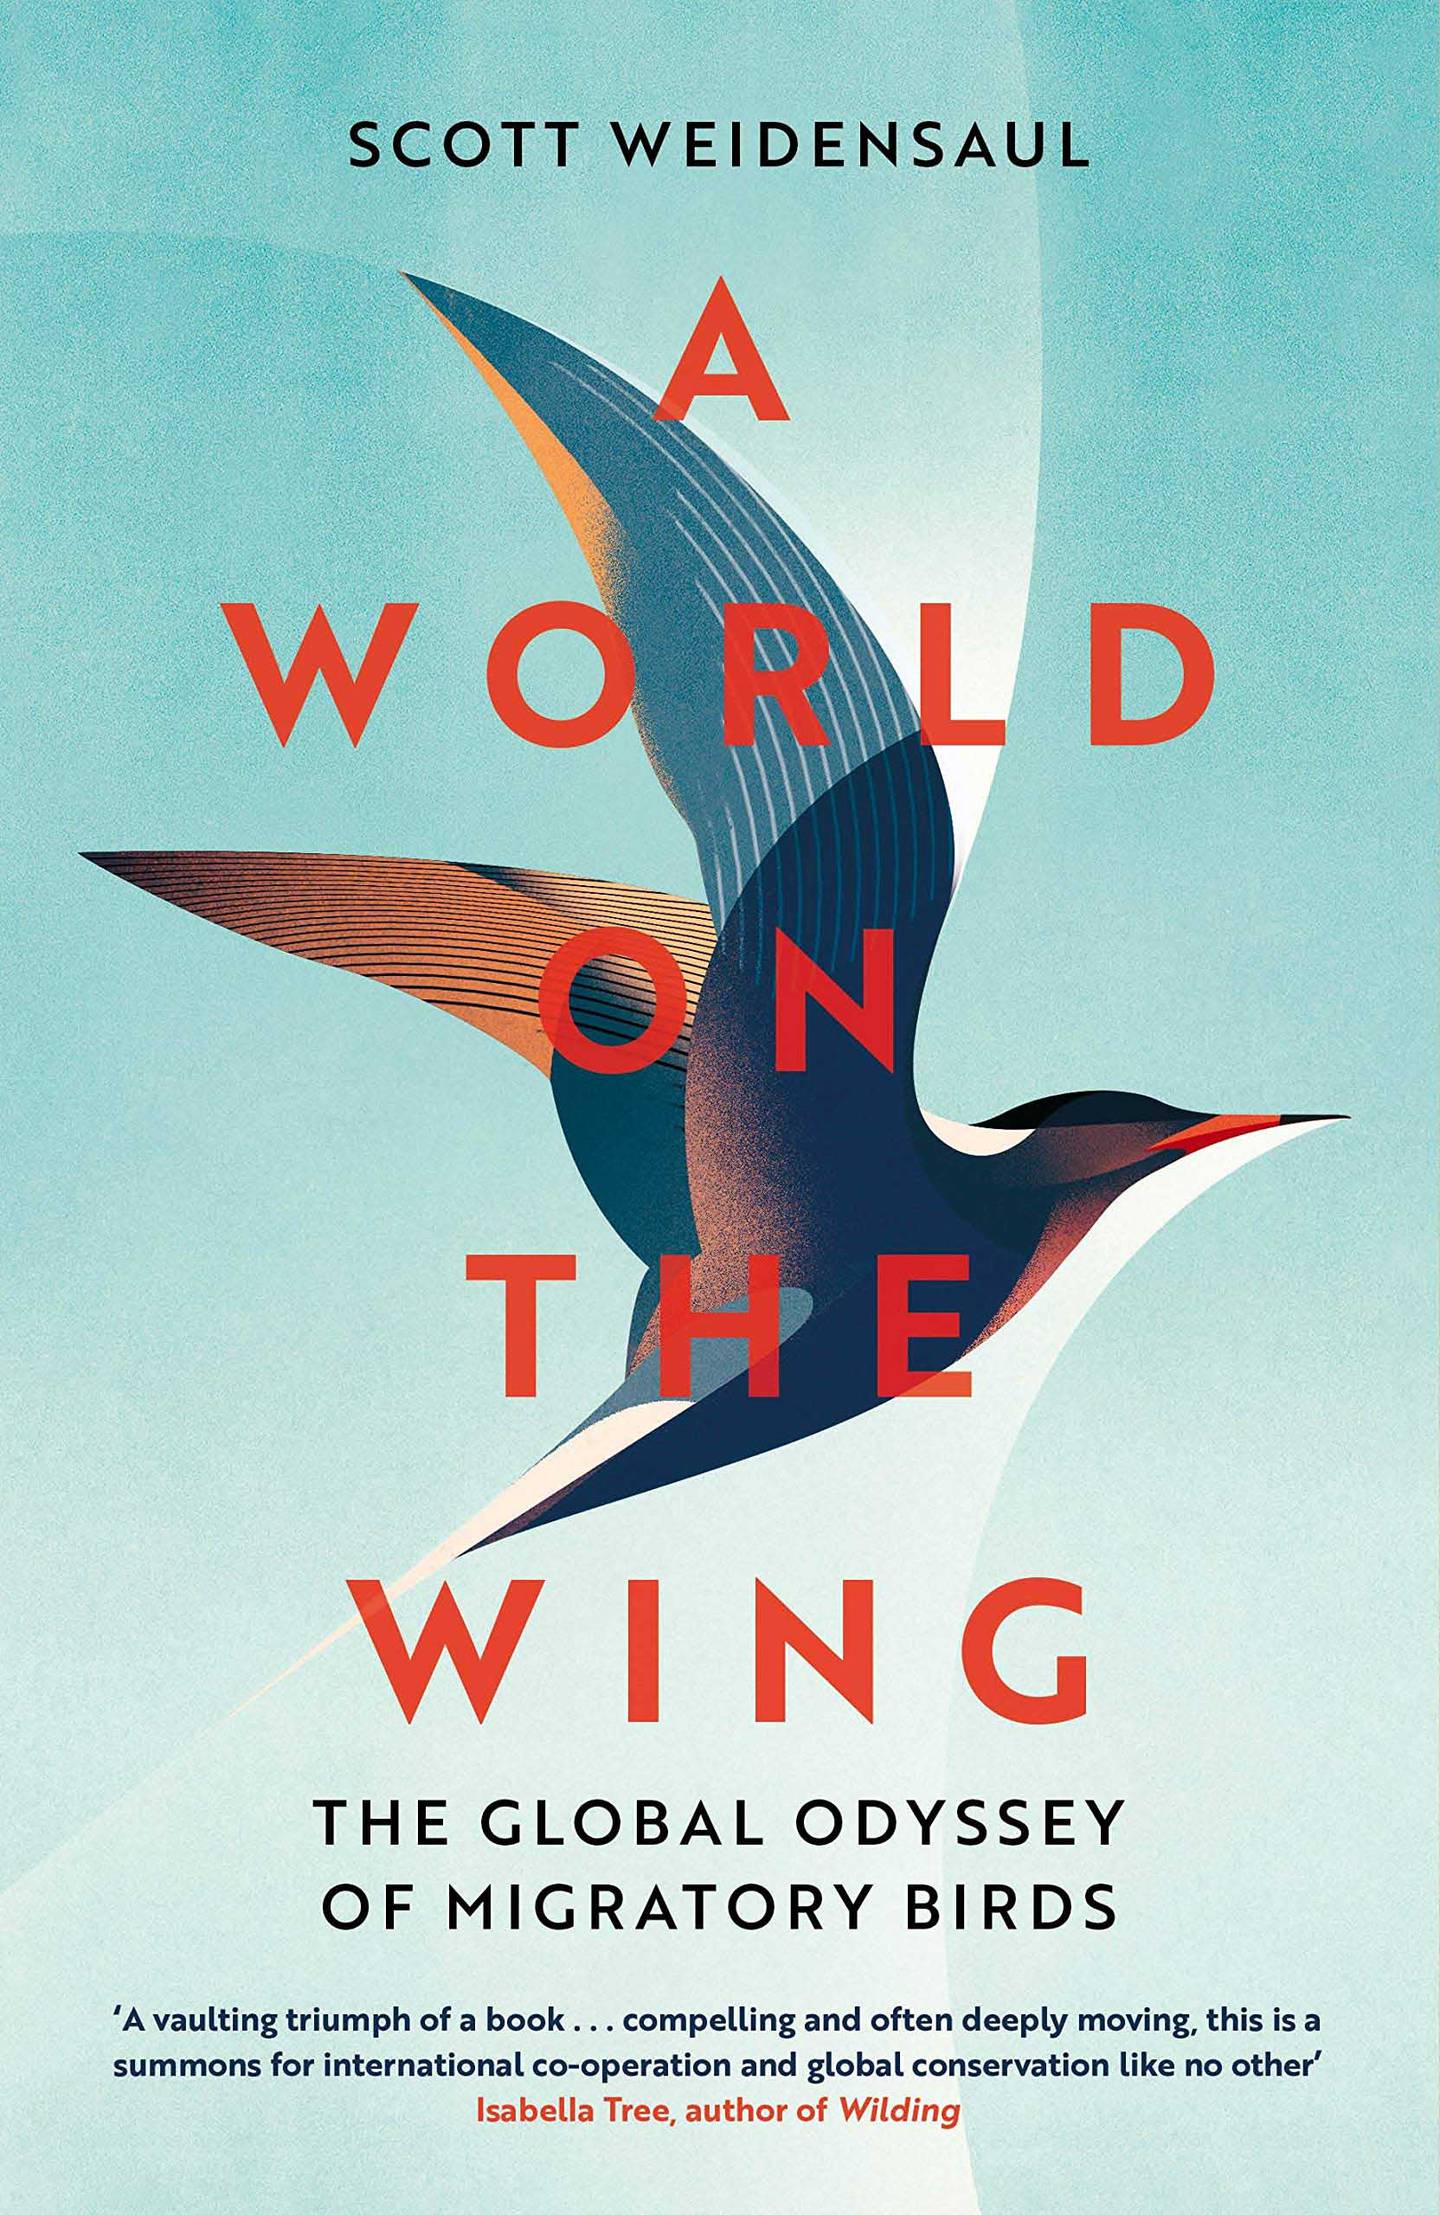 A World on the Wing by Scott Weidensaul published by Picador. Photo: PanMacmillan